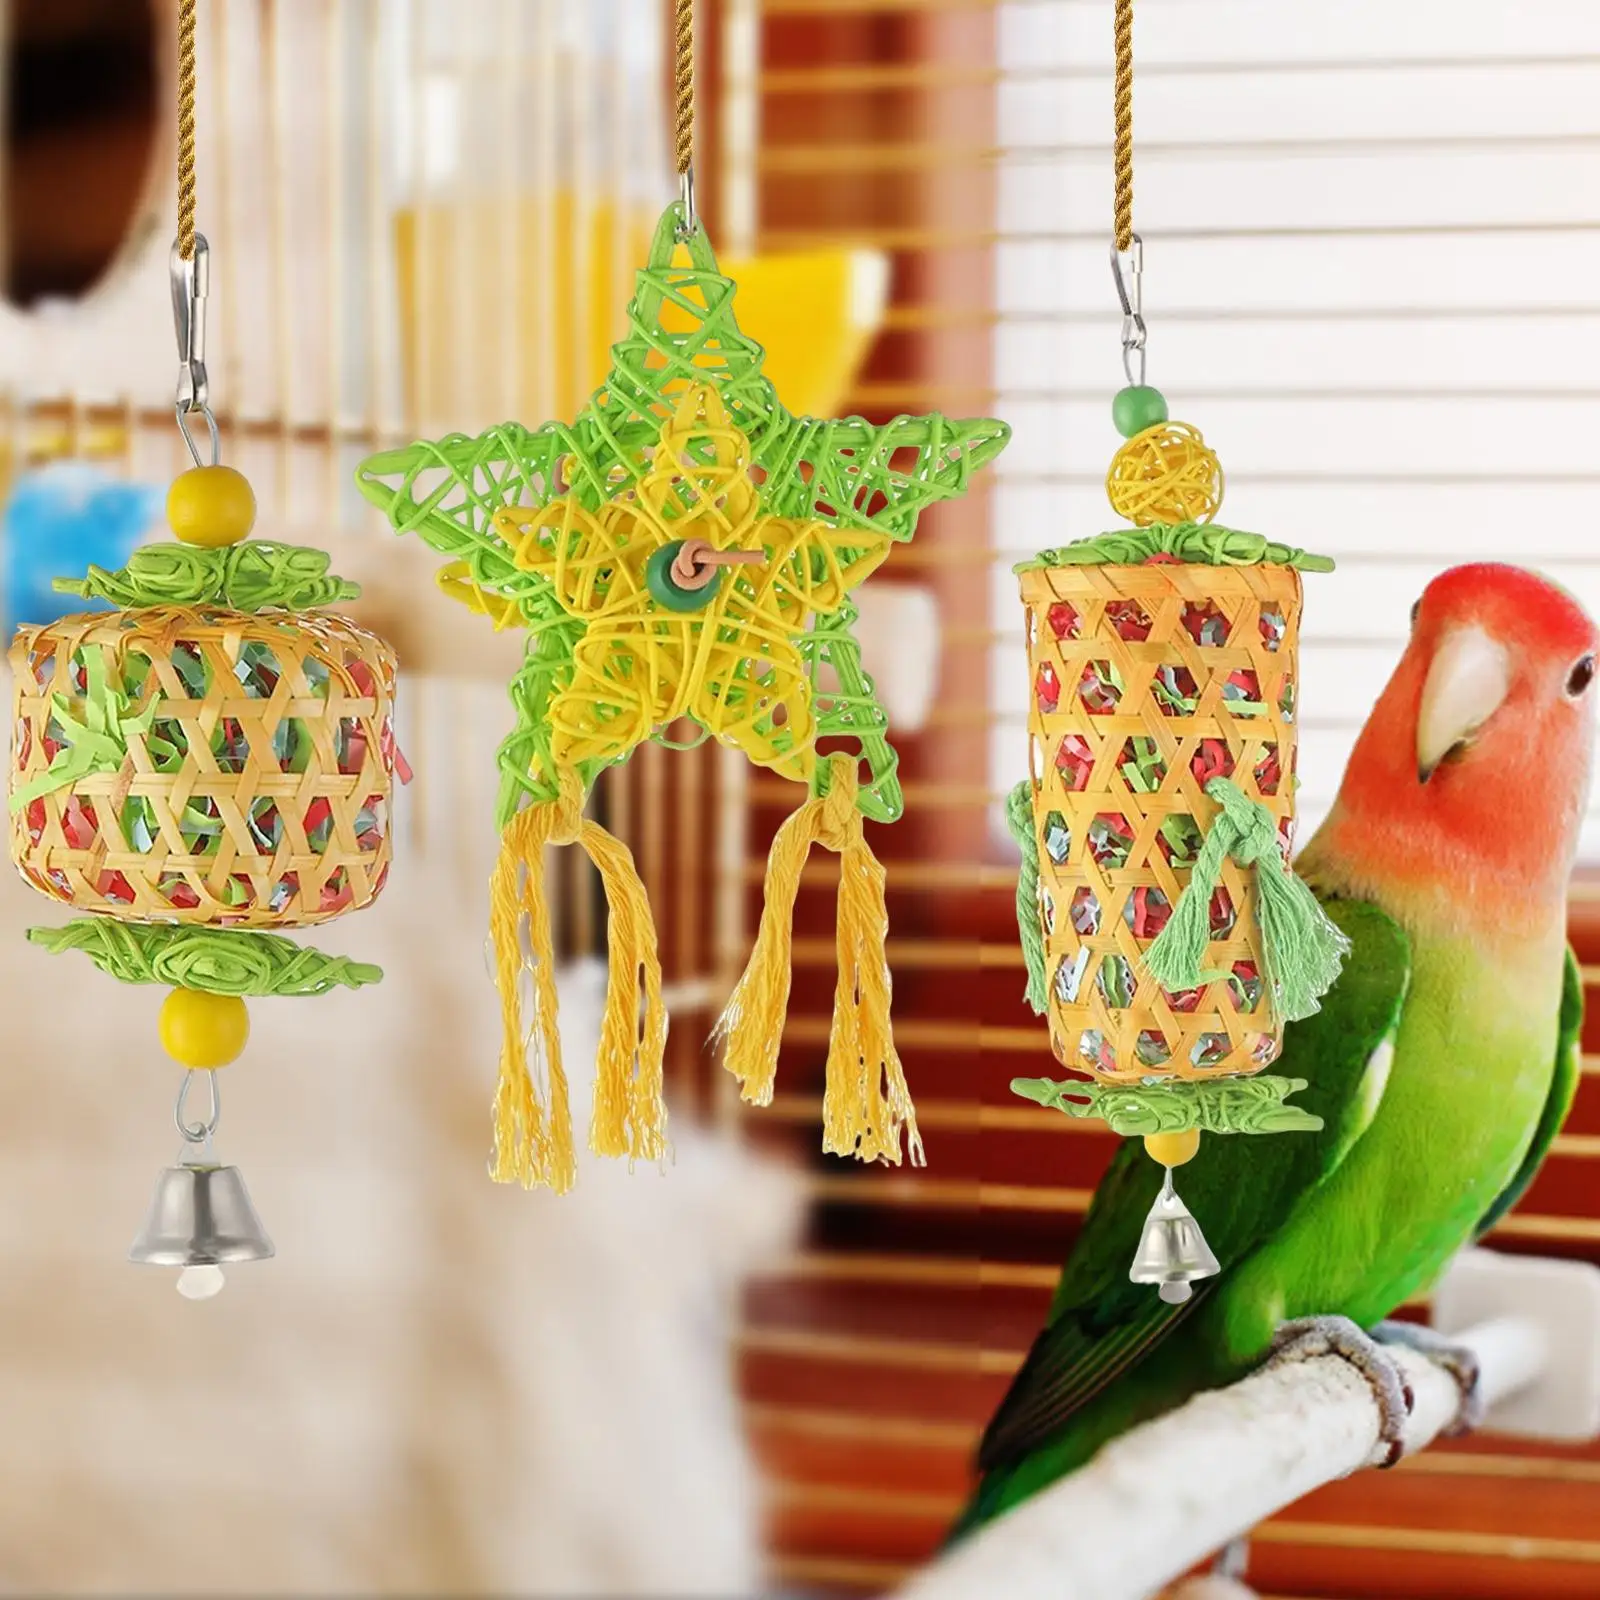 3Pcs Parrot Toys Hanging Swing Cage Bird Chewing Toy for Budgie Finches